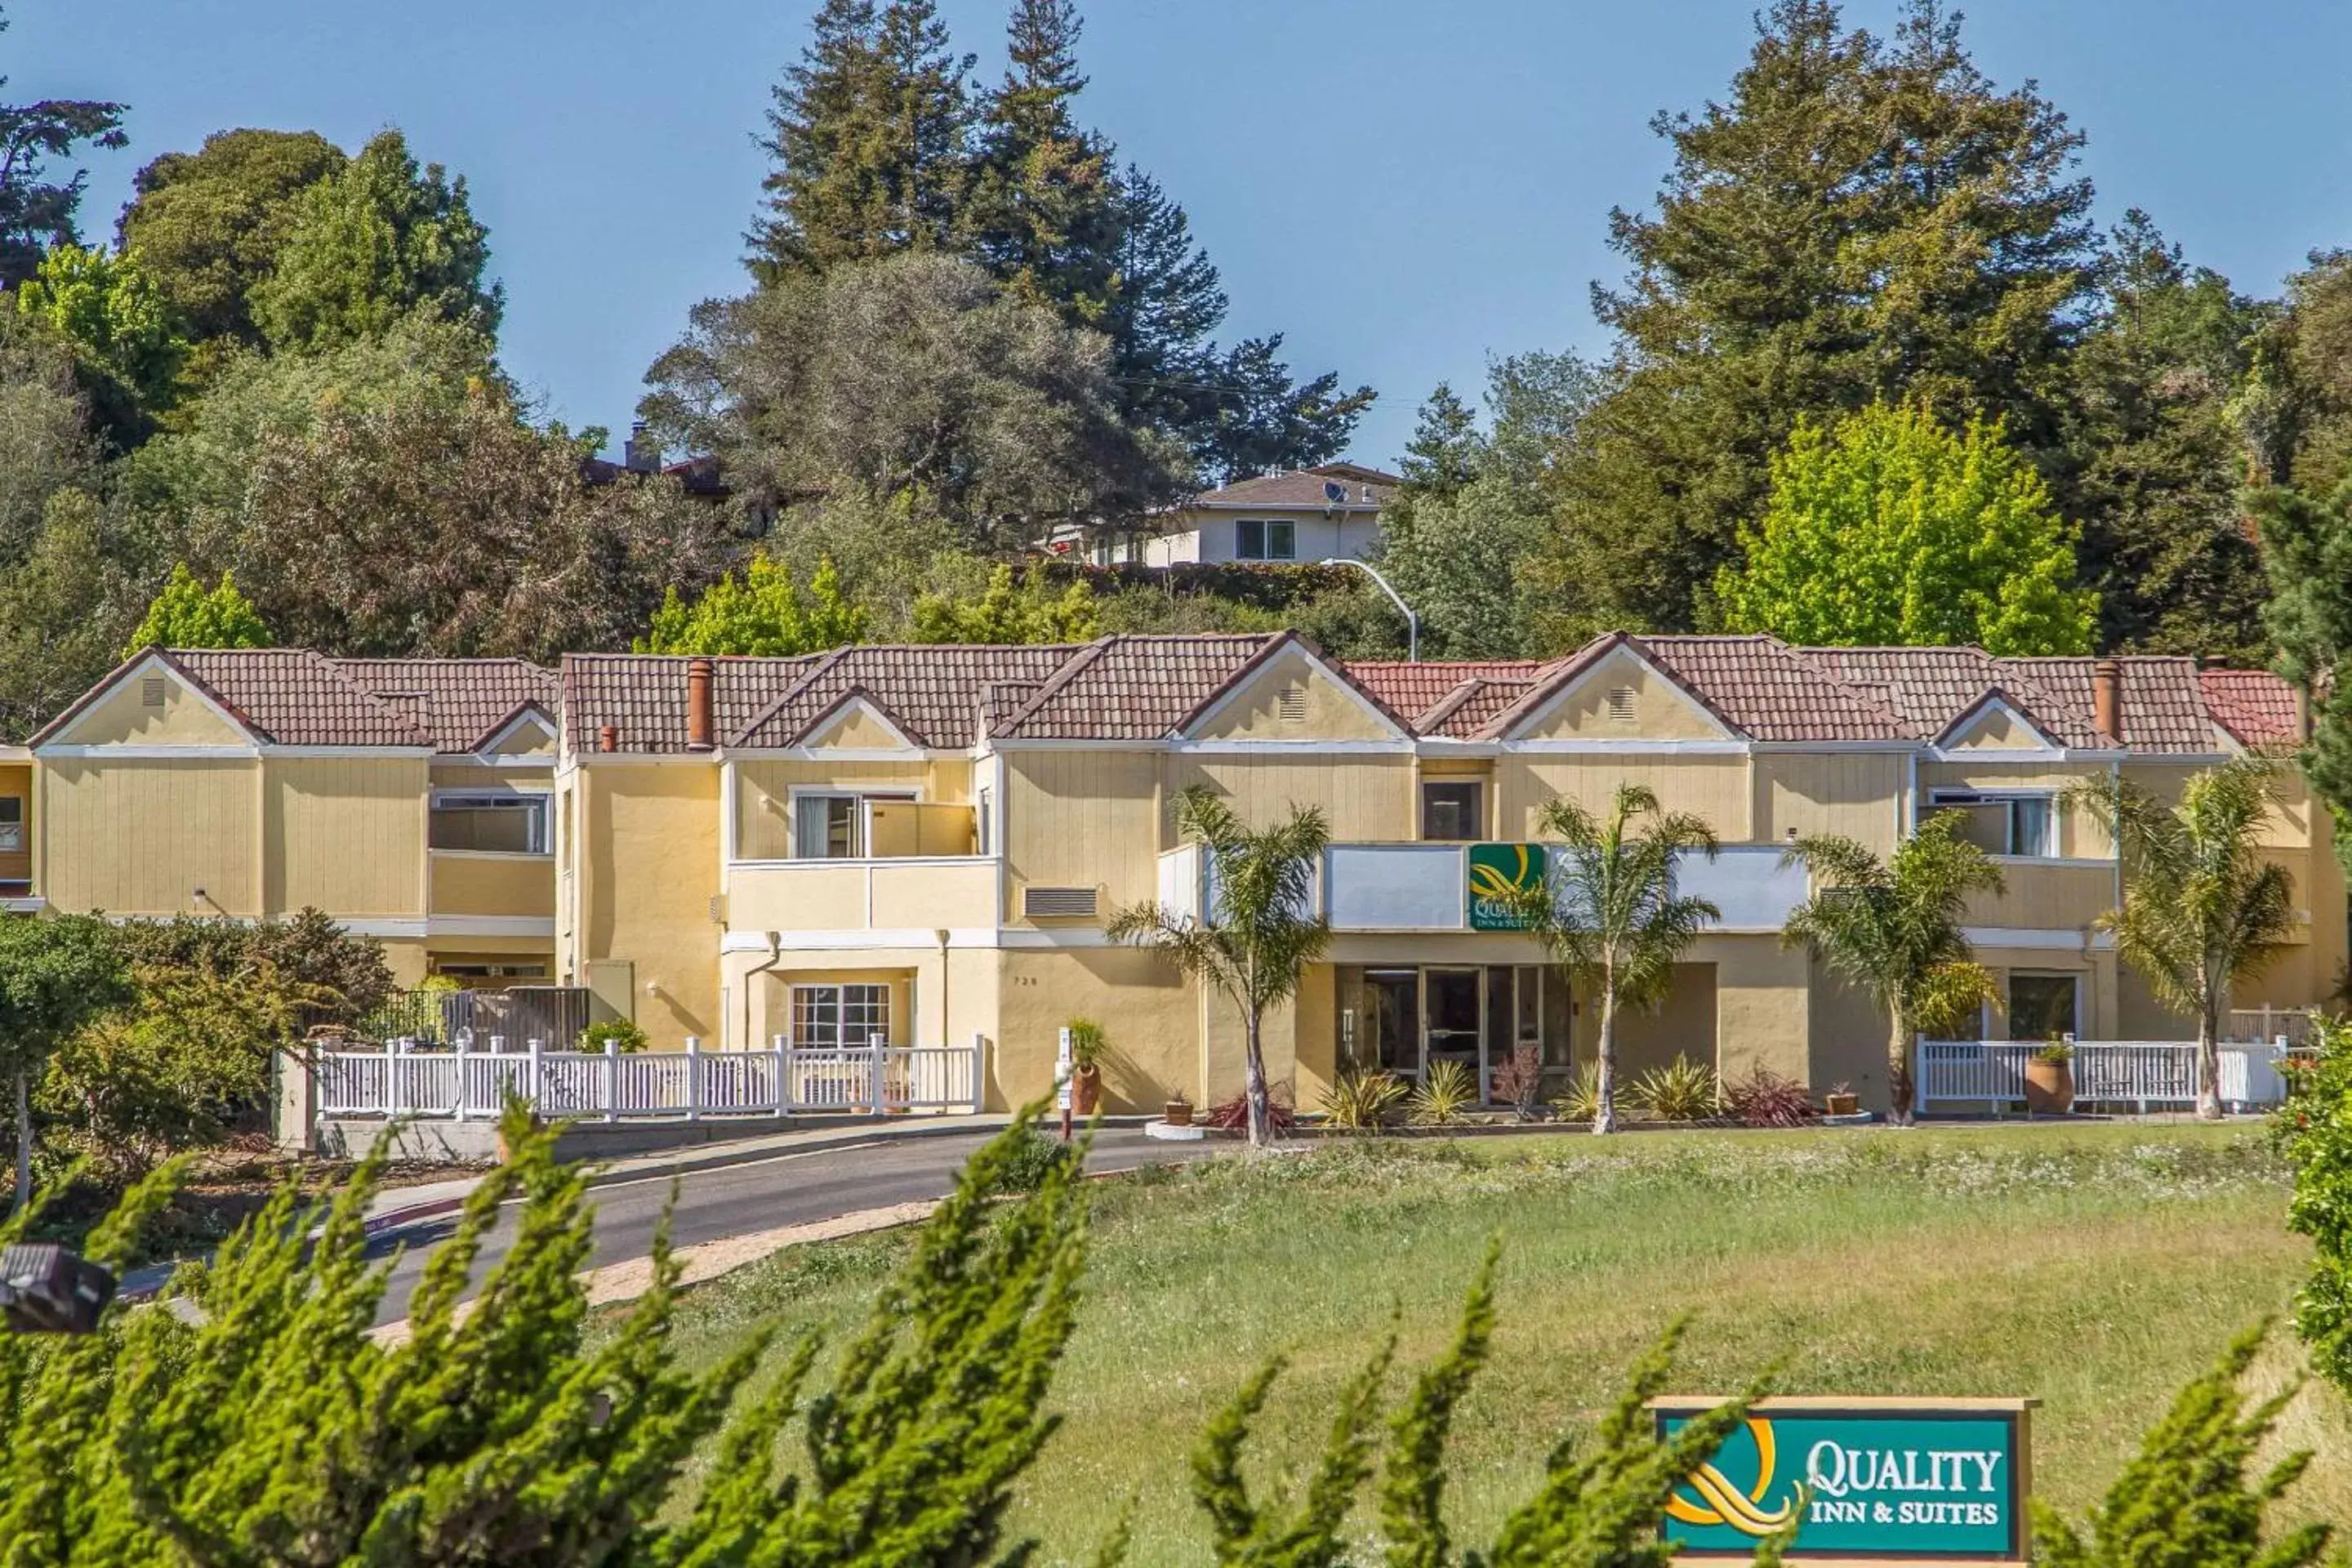 Property building in Quality Inn & Suites Capitola